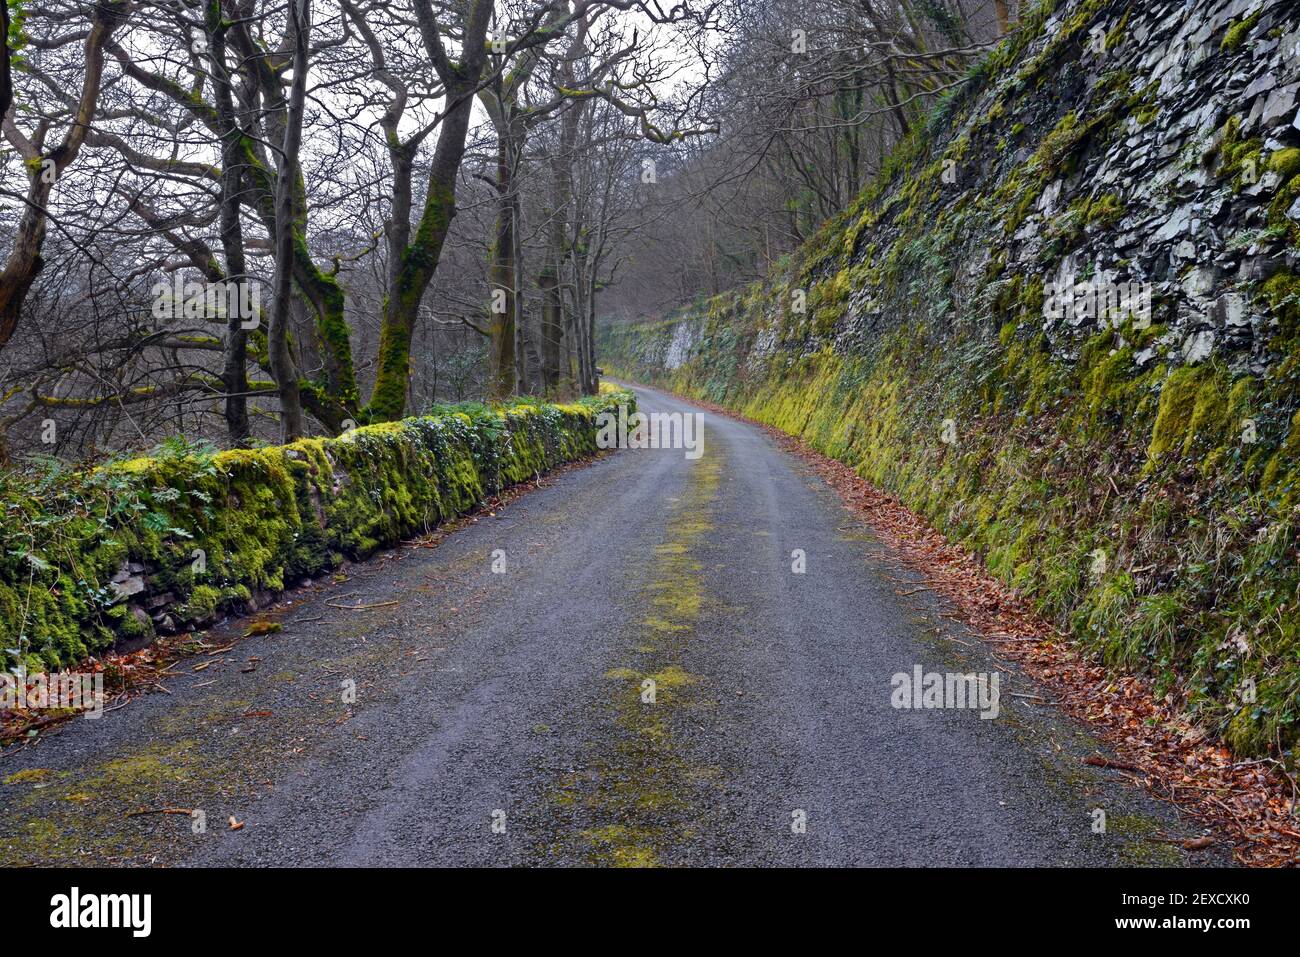 This ancient, mossy lane is in the Ogwen Valley near Tregarth in North Wales. It stretches from Dinas Farm to the Llwyn Bleddyn Road. Stock Photo